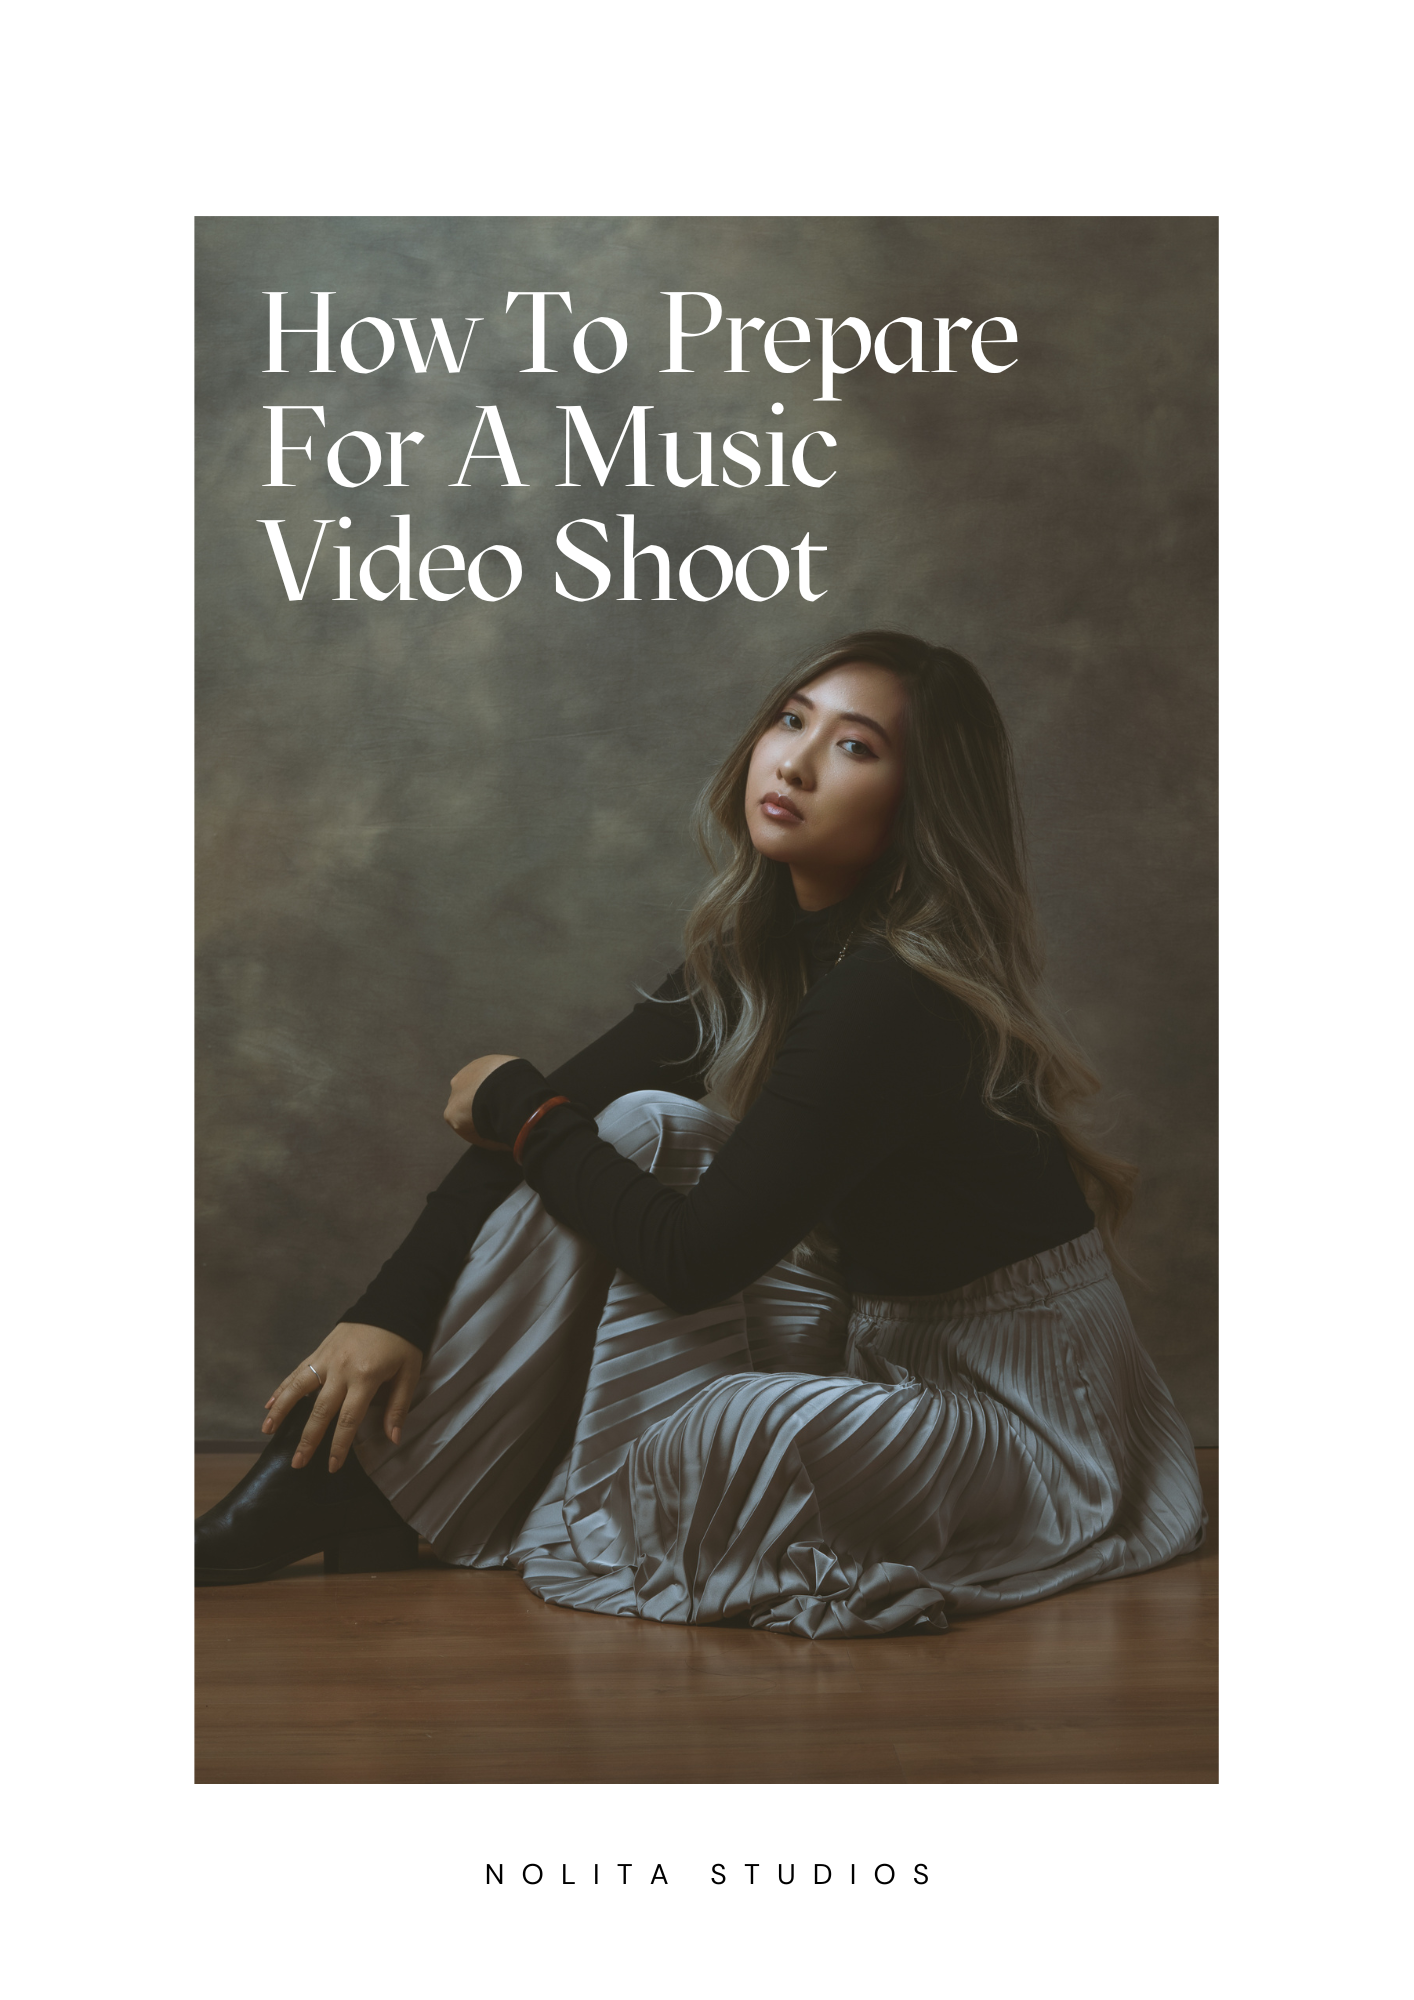 How To Prepare For A Music Video Shoot